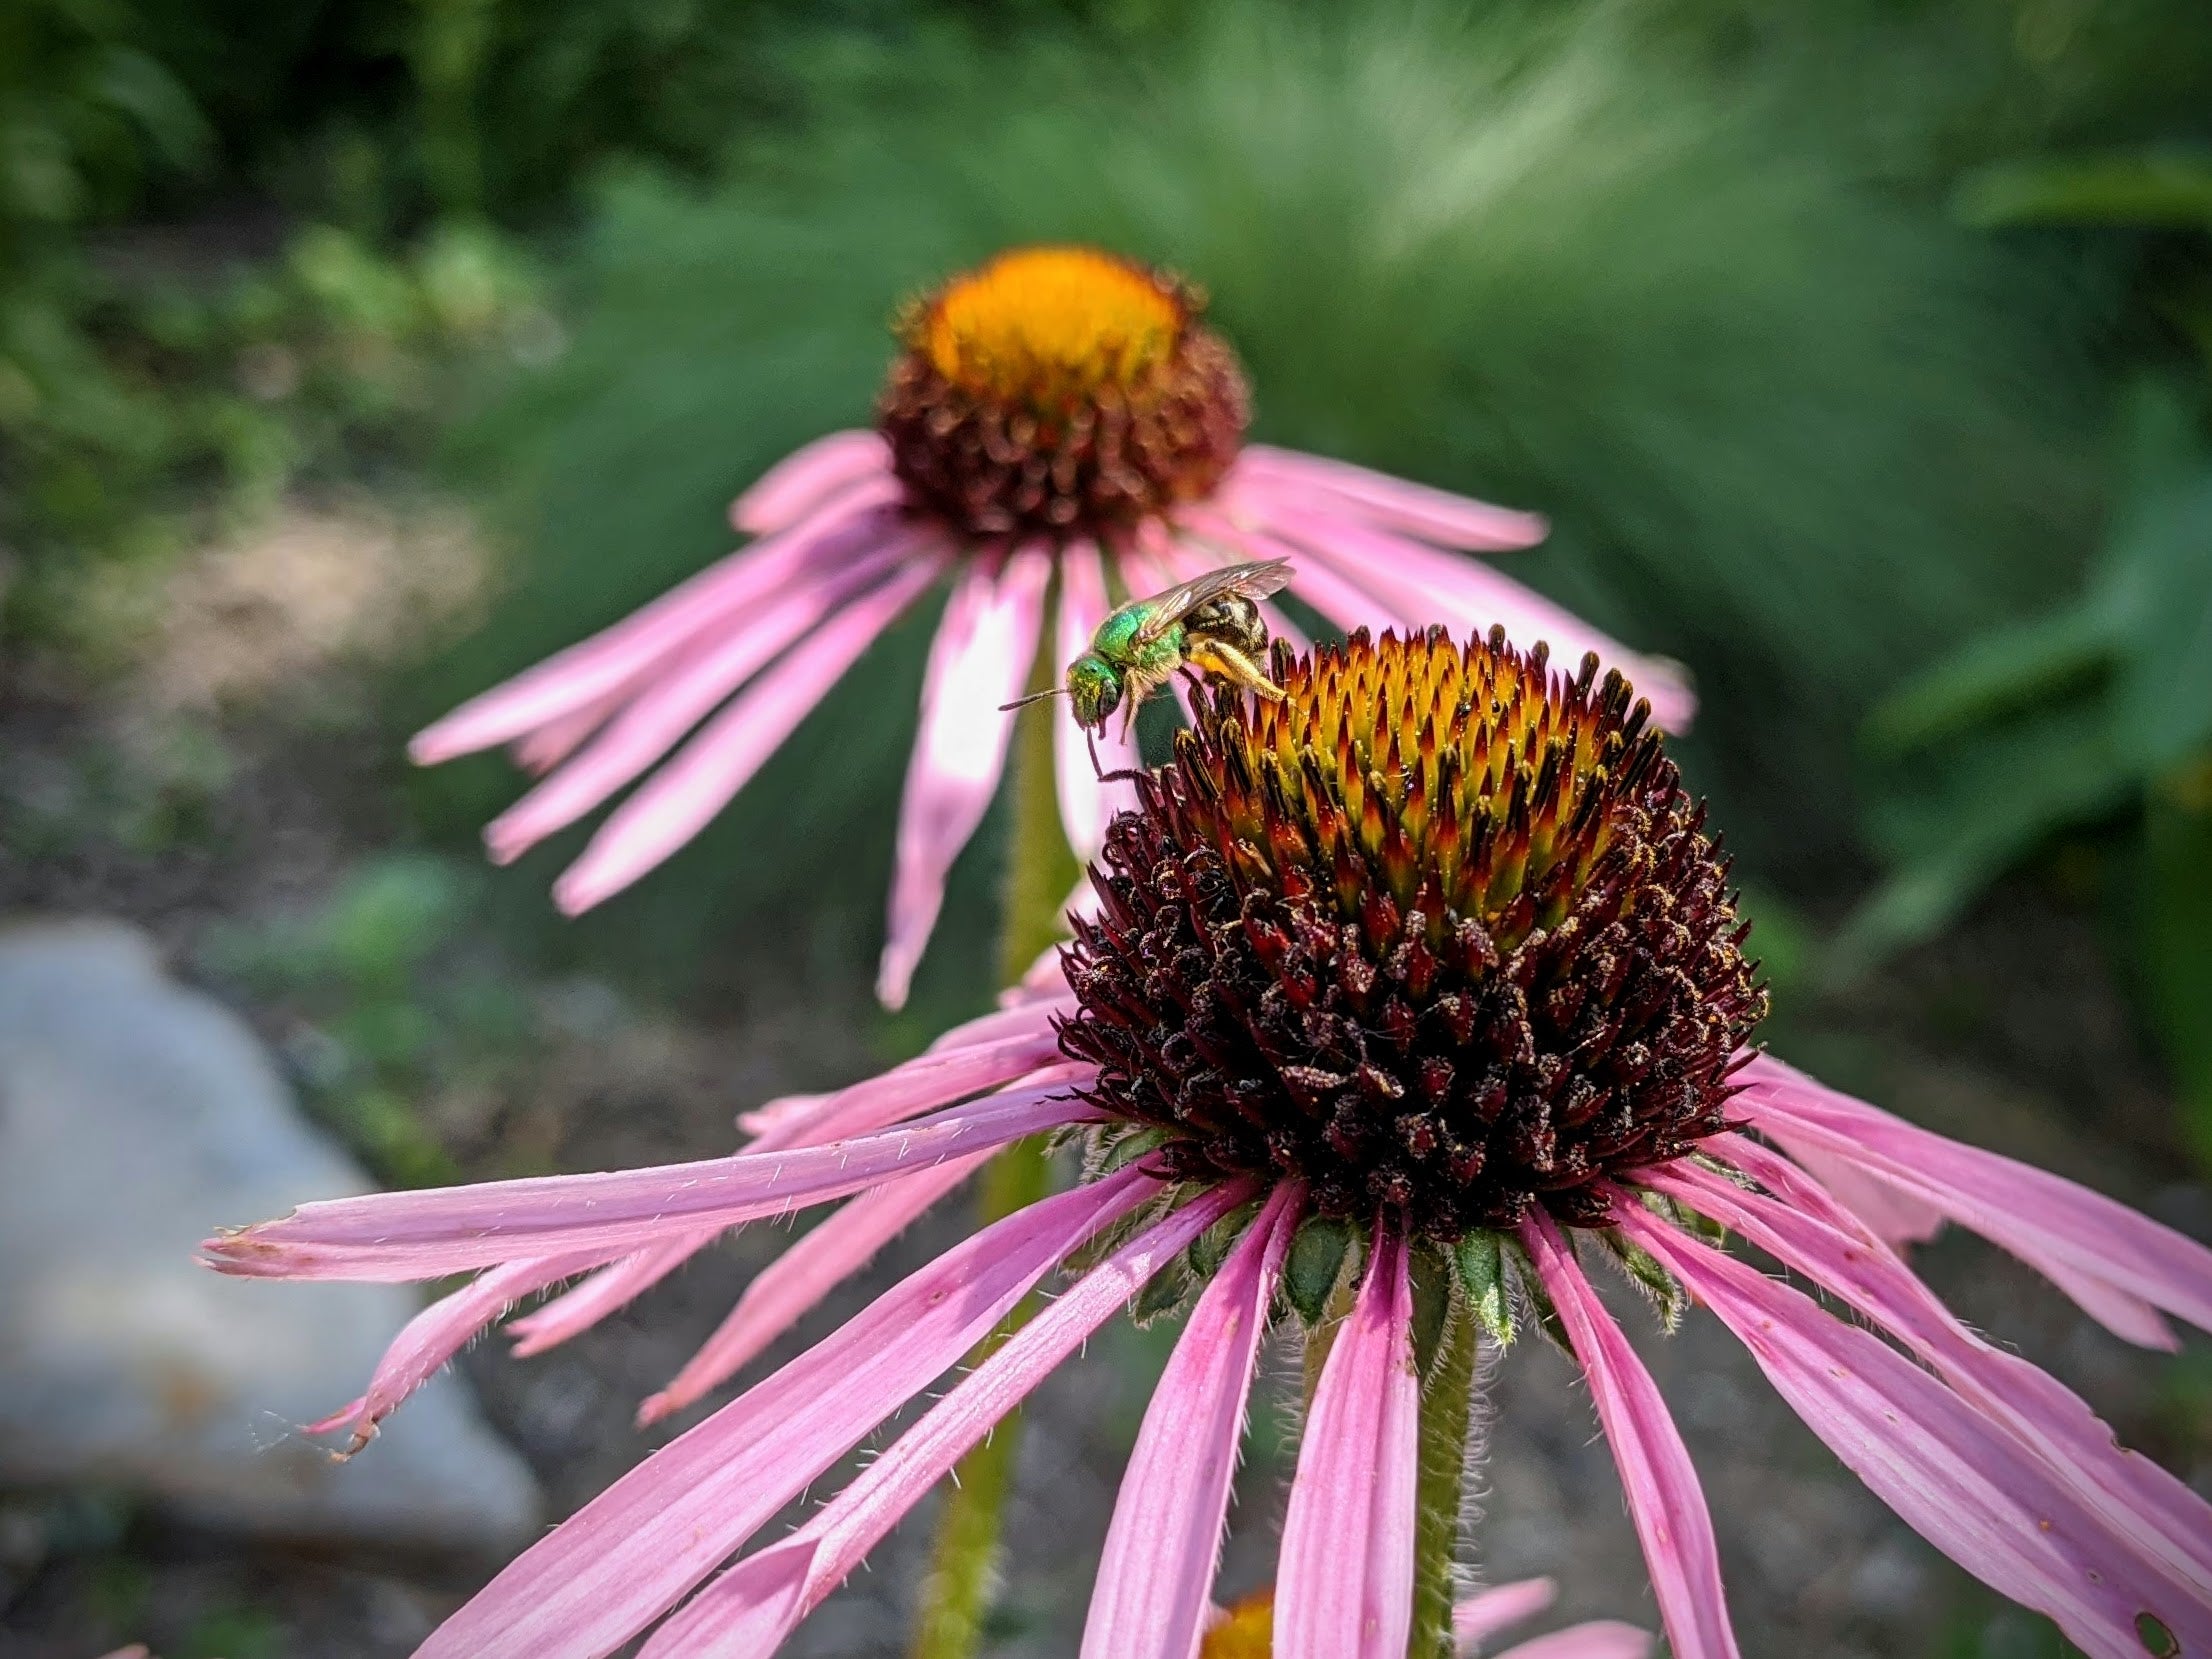 A green agapostemon sweat bee is nectaring on the flower of Tennessee coneflower.